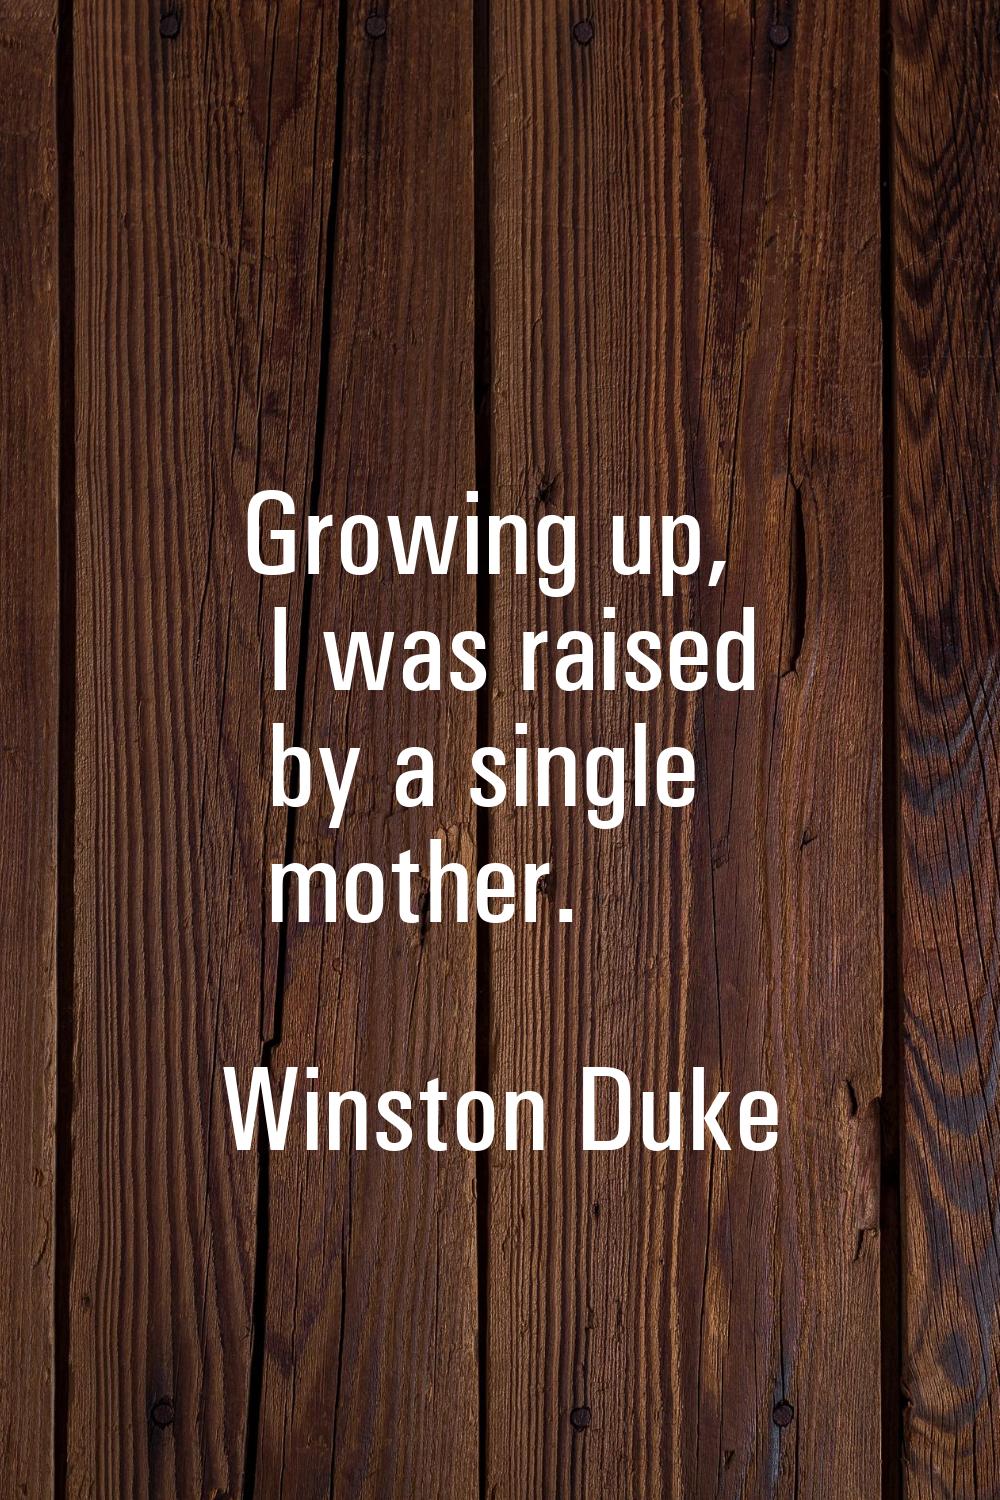 Growing up, I was raised by a single mother.